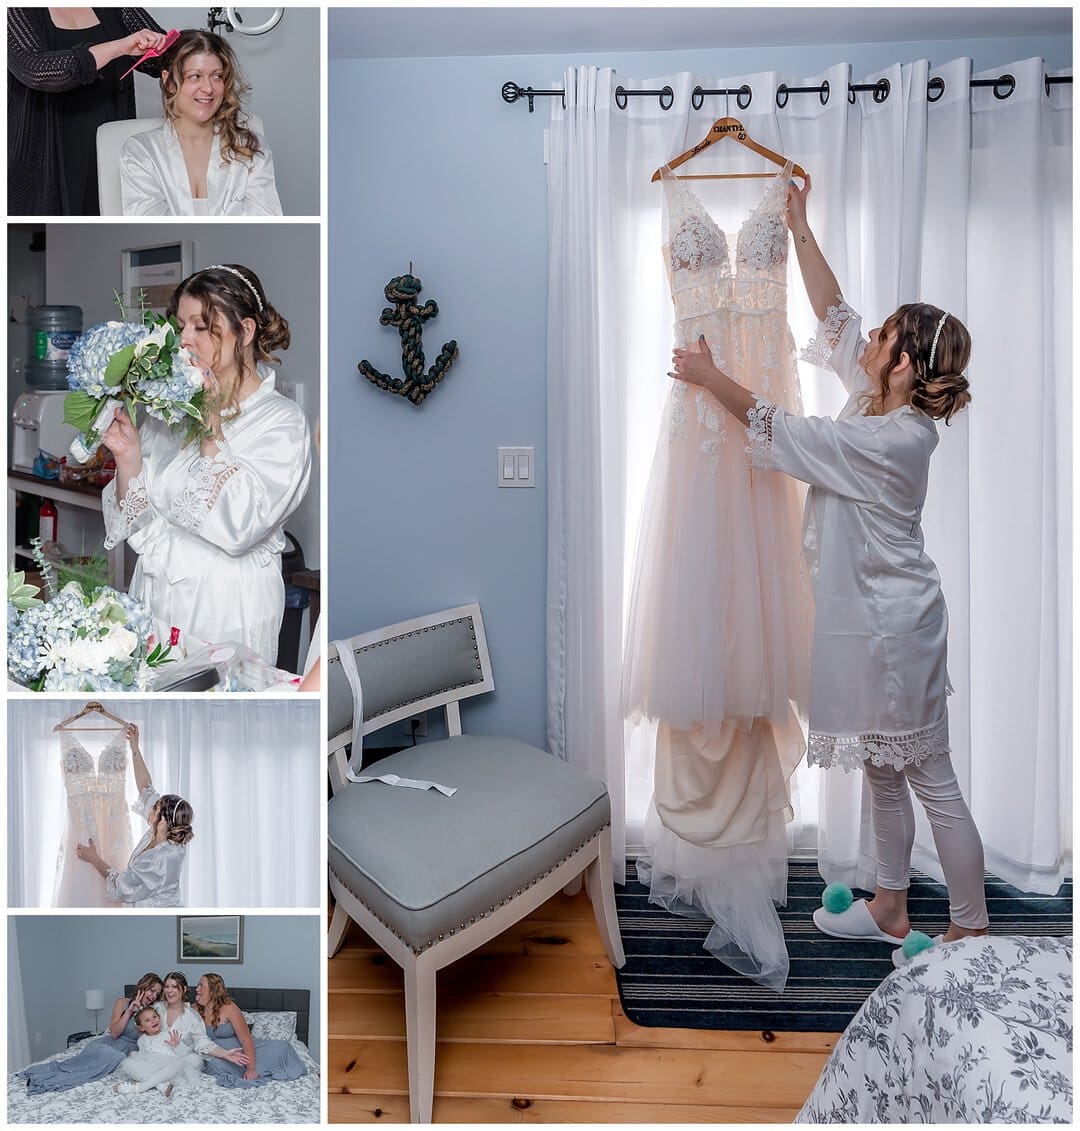 The bride reaches for her wedding dress during bridal prep in an Airbnb in Mt Uniacke NS.